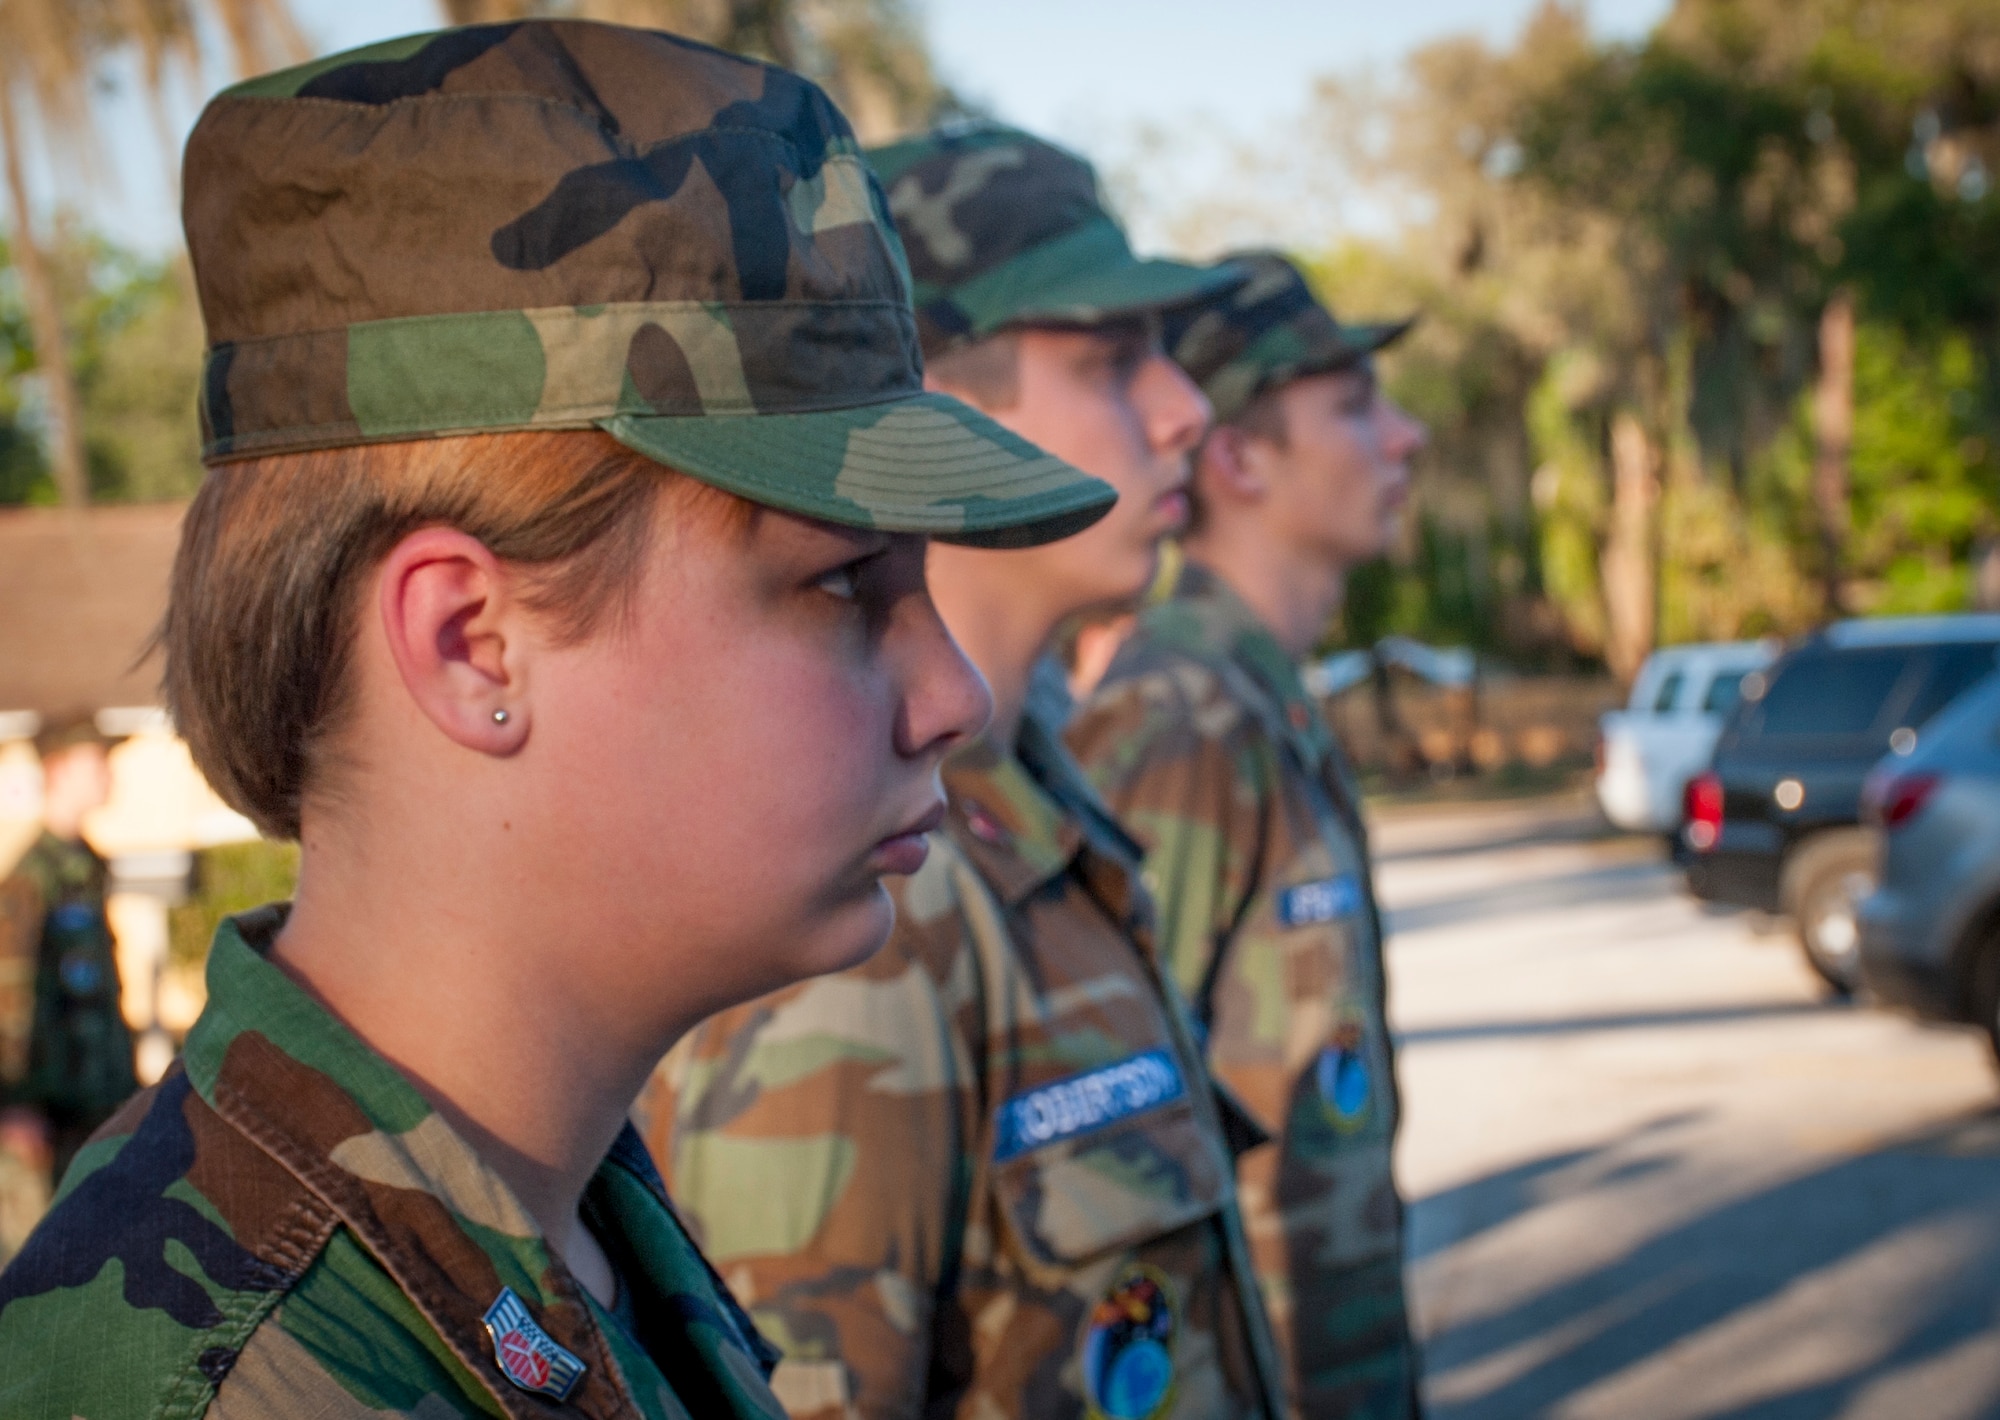 Civil Air Patrol General Chuck Yeager Cadet Squadron cadets stand at attention in formation during a practice drill session in Brandon, Fla., May 8, 2017. The General Chuck Yeager Cadet Squadron consists of 49 cadets and 20 senior members, which consists of former military, actively serving military and civilians. (U.S. Air Force by Airman 1st Class Mariette Adams)